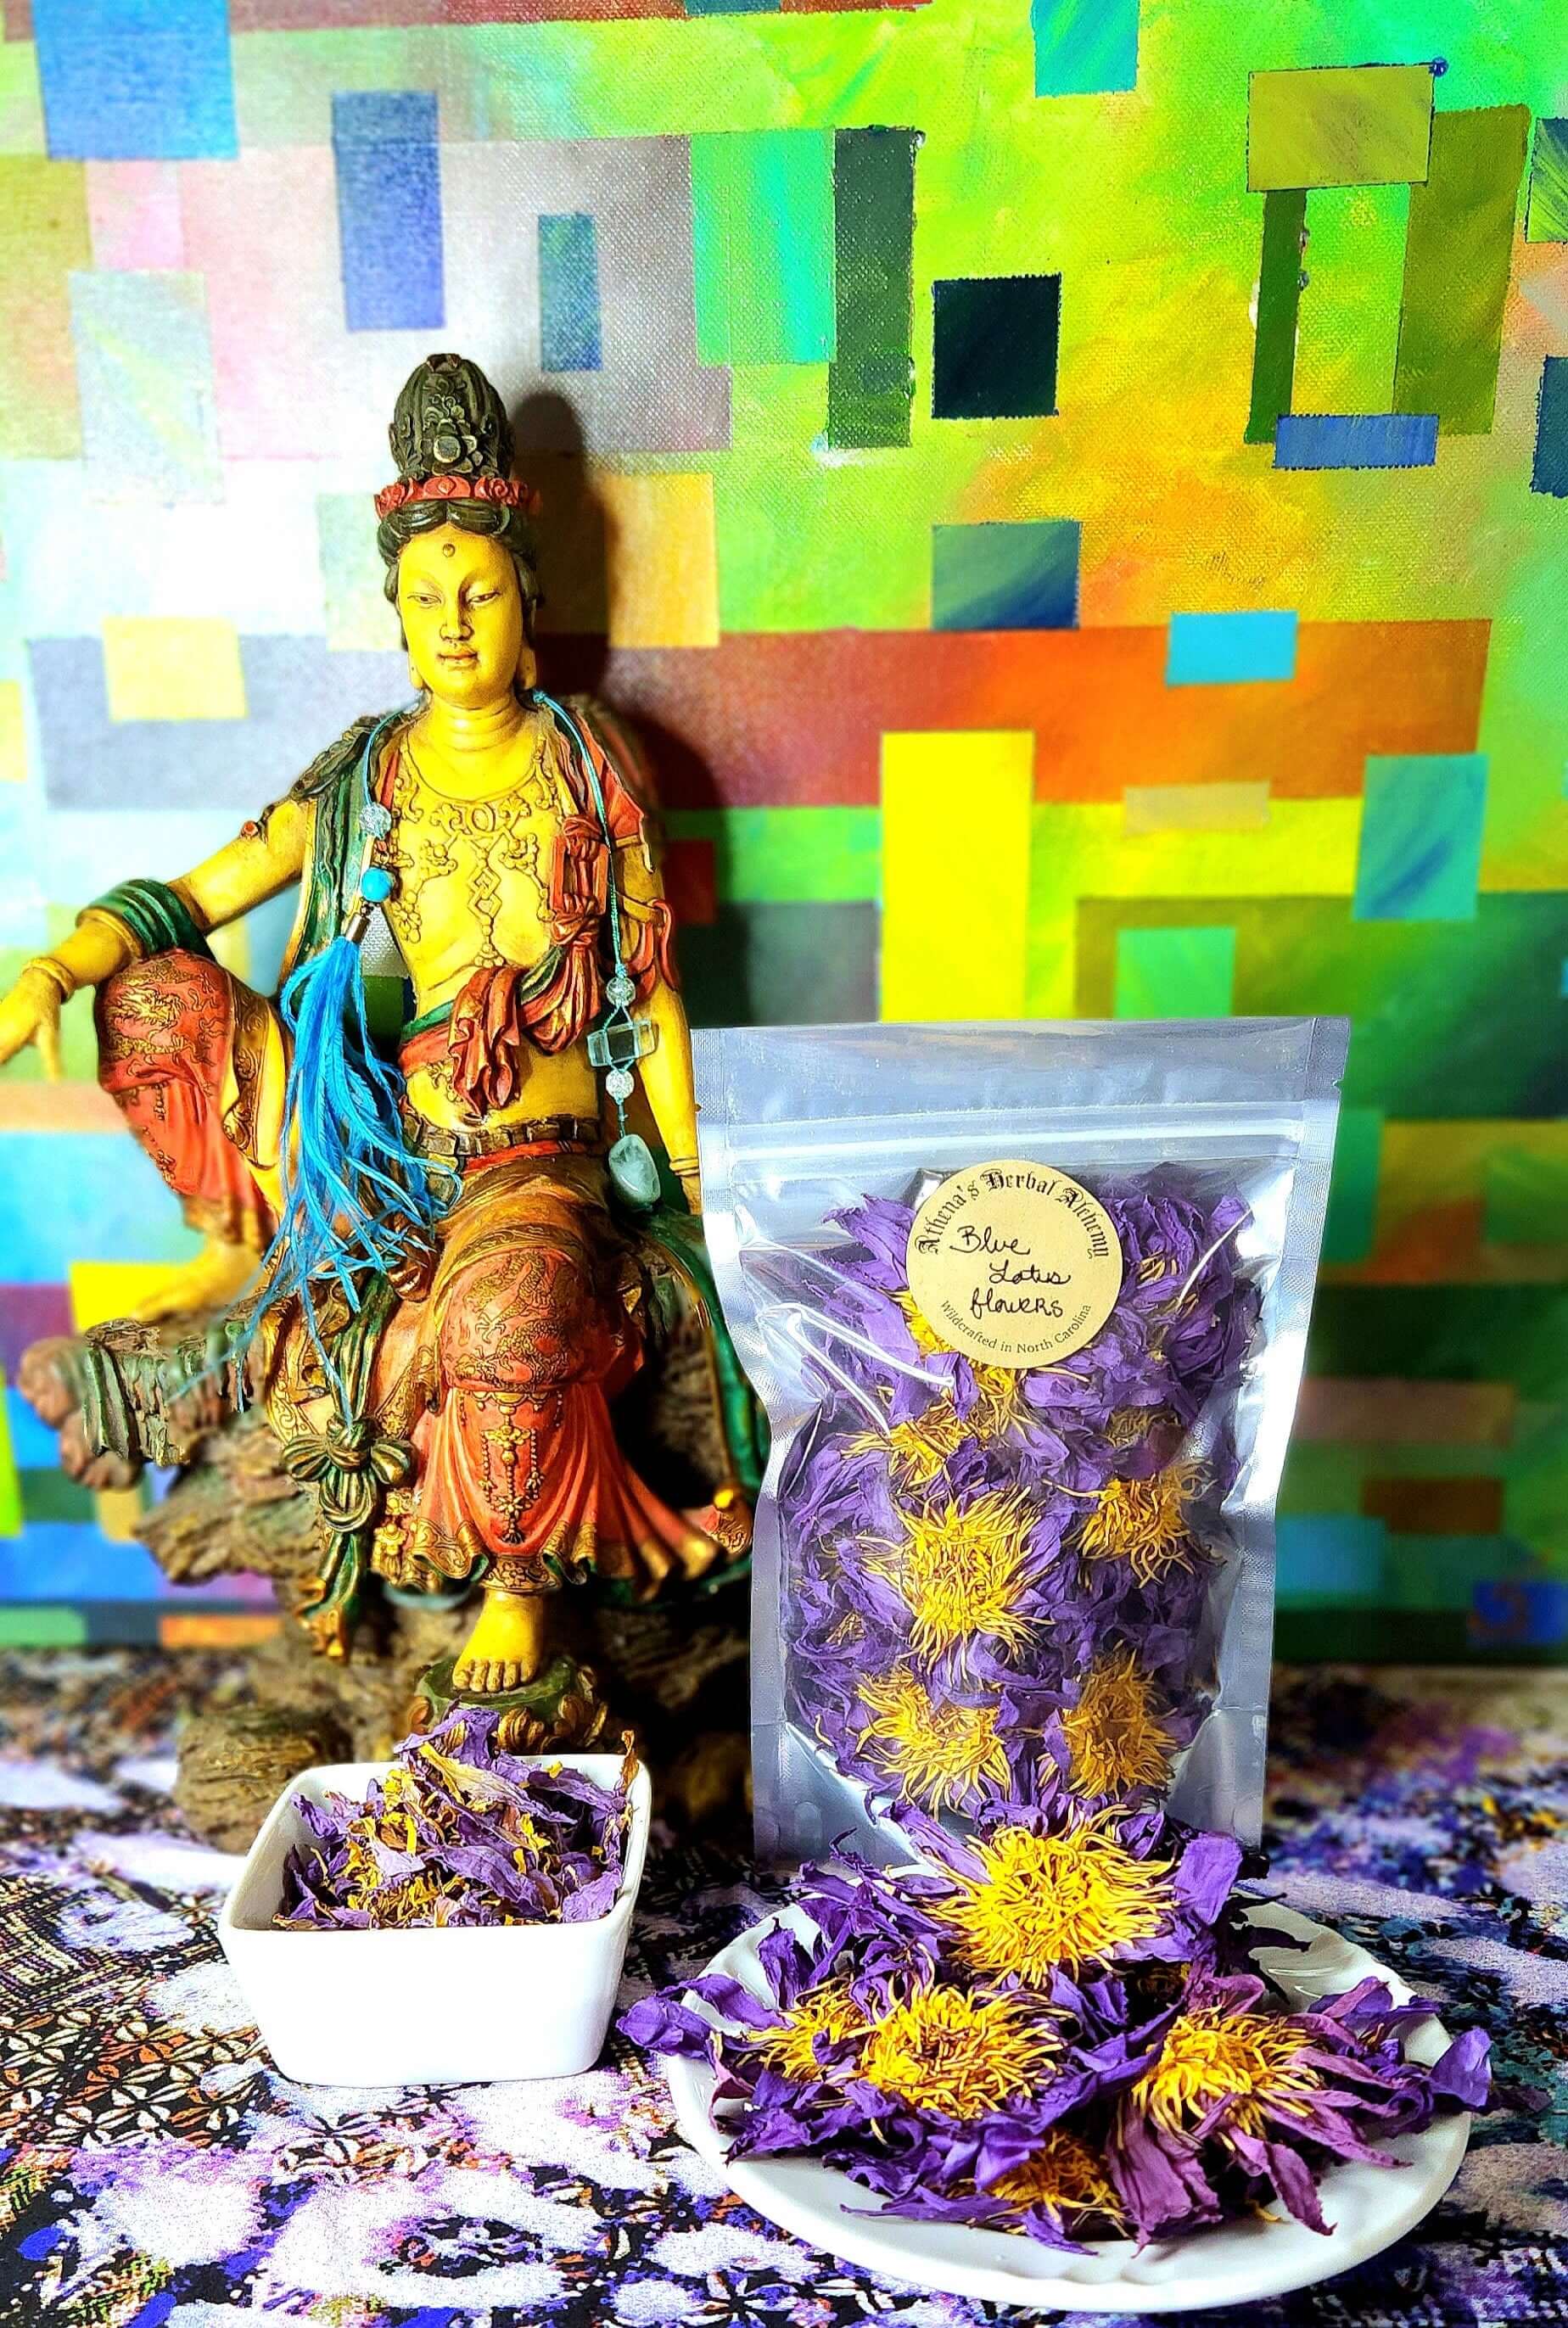 Premium~Egyptian Blue Lotus Petals or Flowers, Tea, 1-2 inches wide~Lucid Dream~Nymphaea Caerulea~Organic, With Tea bags- Athena's Herbal Alchemy